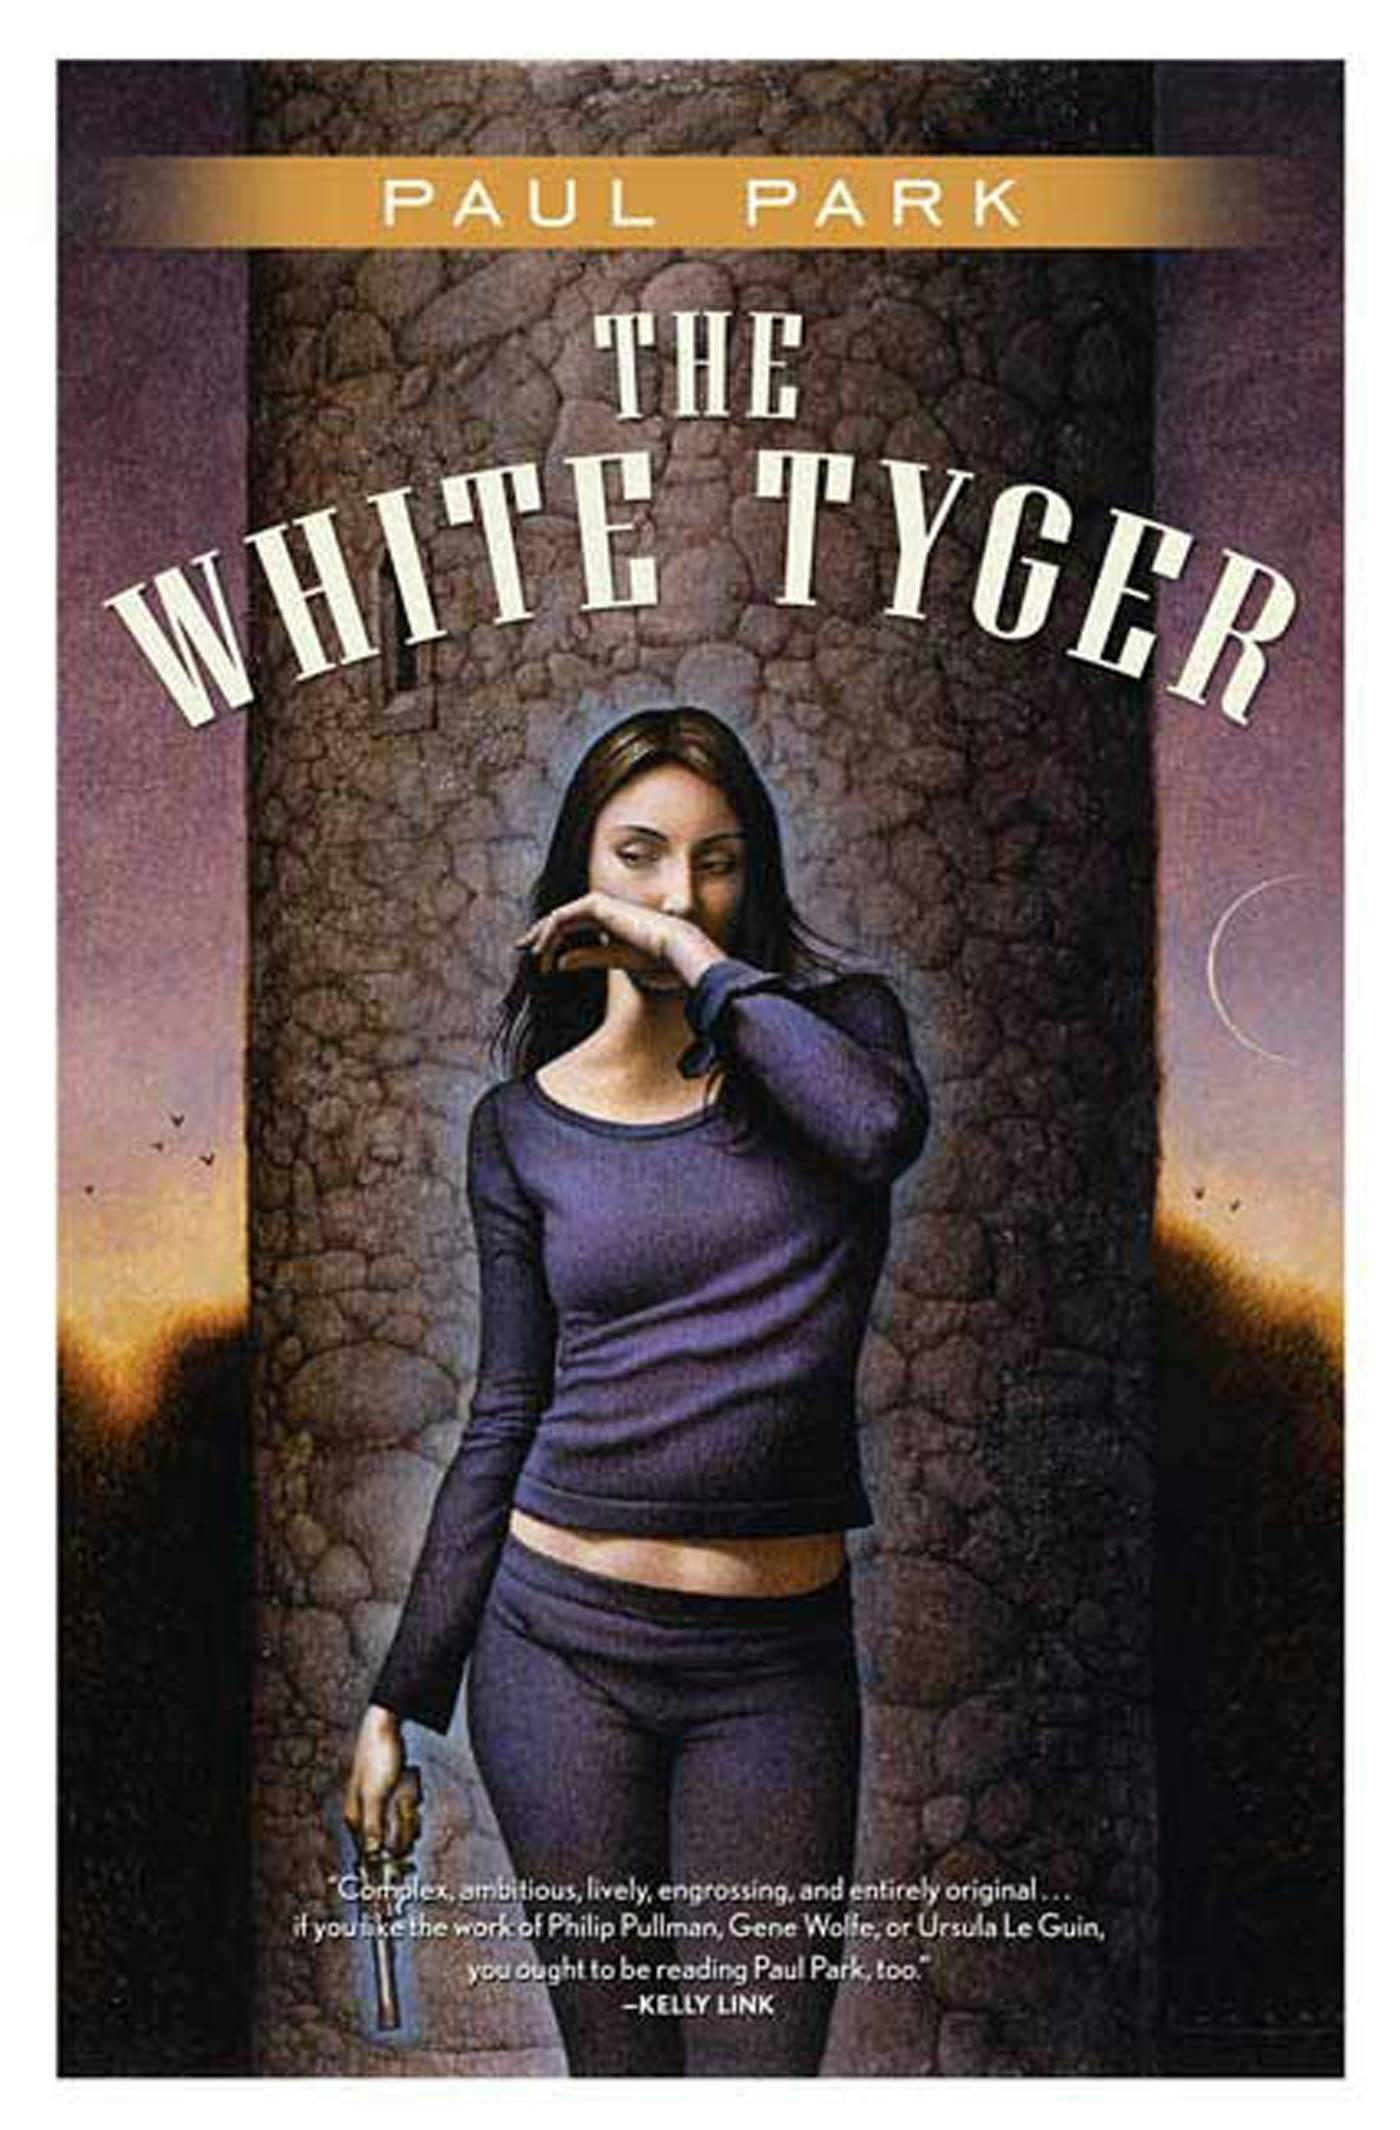 Cover for the book titled as: The White Tyger